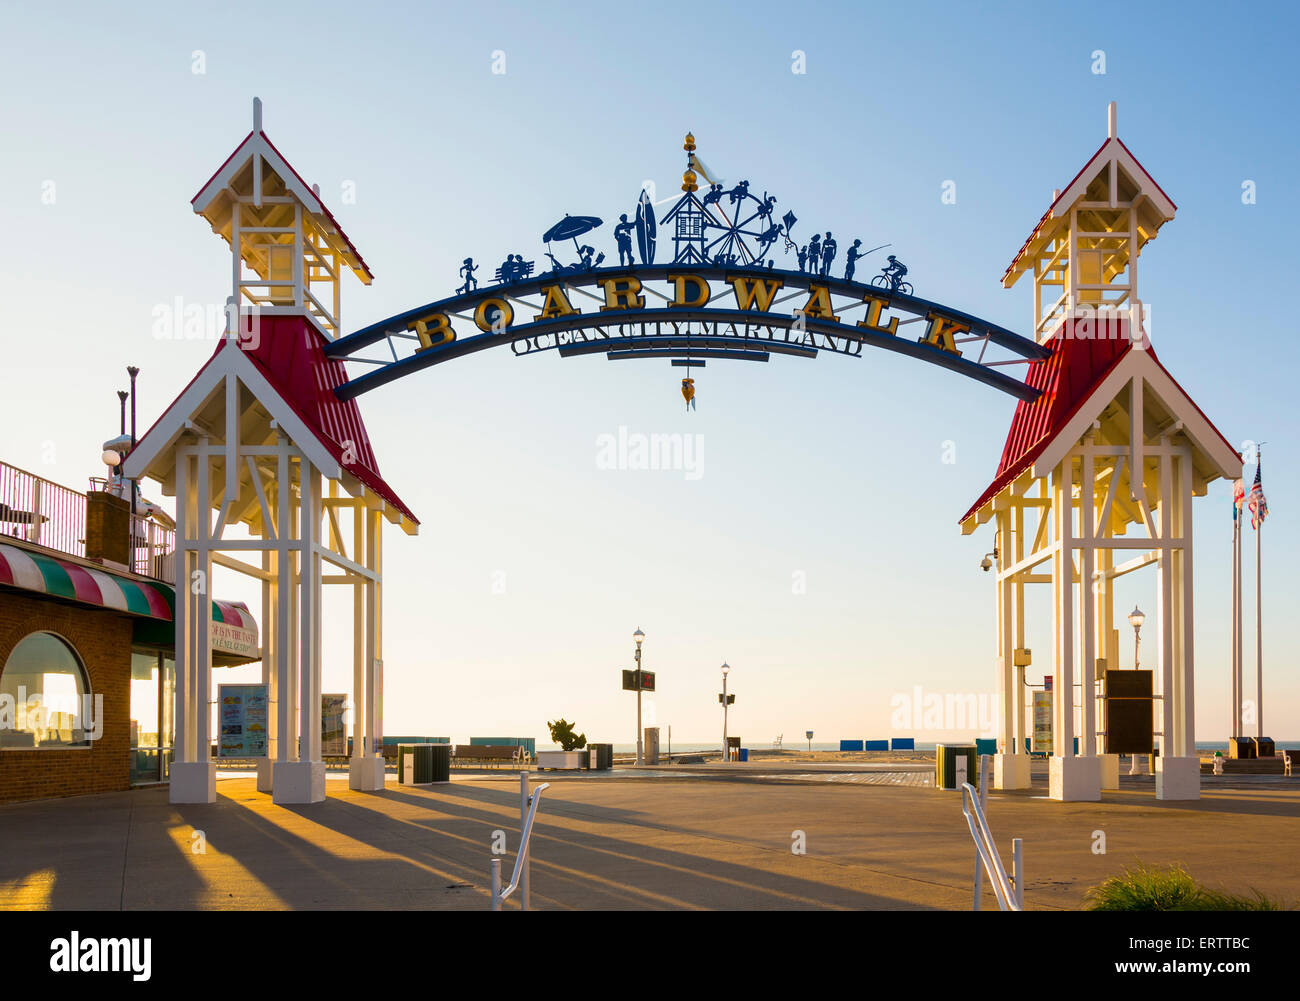 Famous sign above the deserted boardwalk of Ocean City, Maryland, United States of America Stock Photo